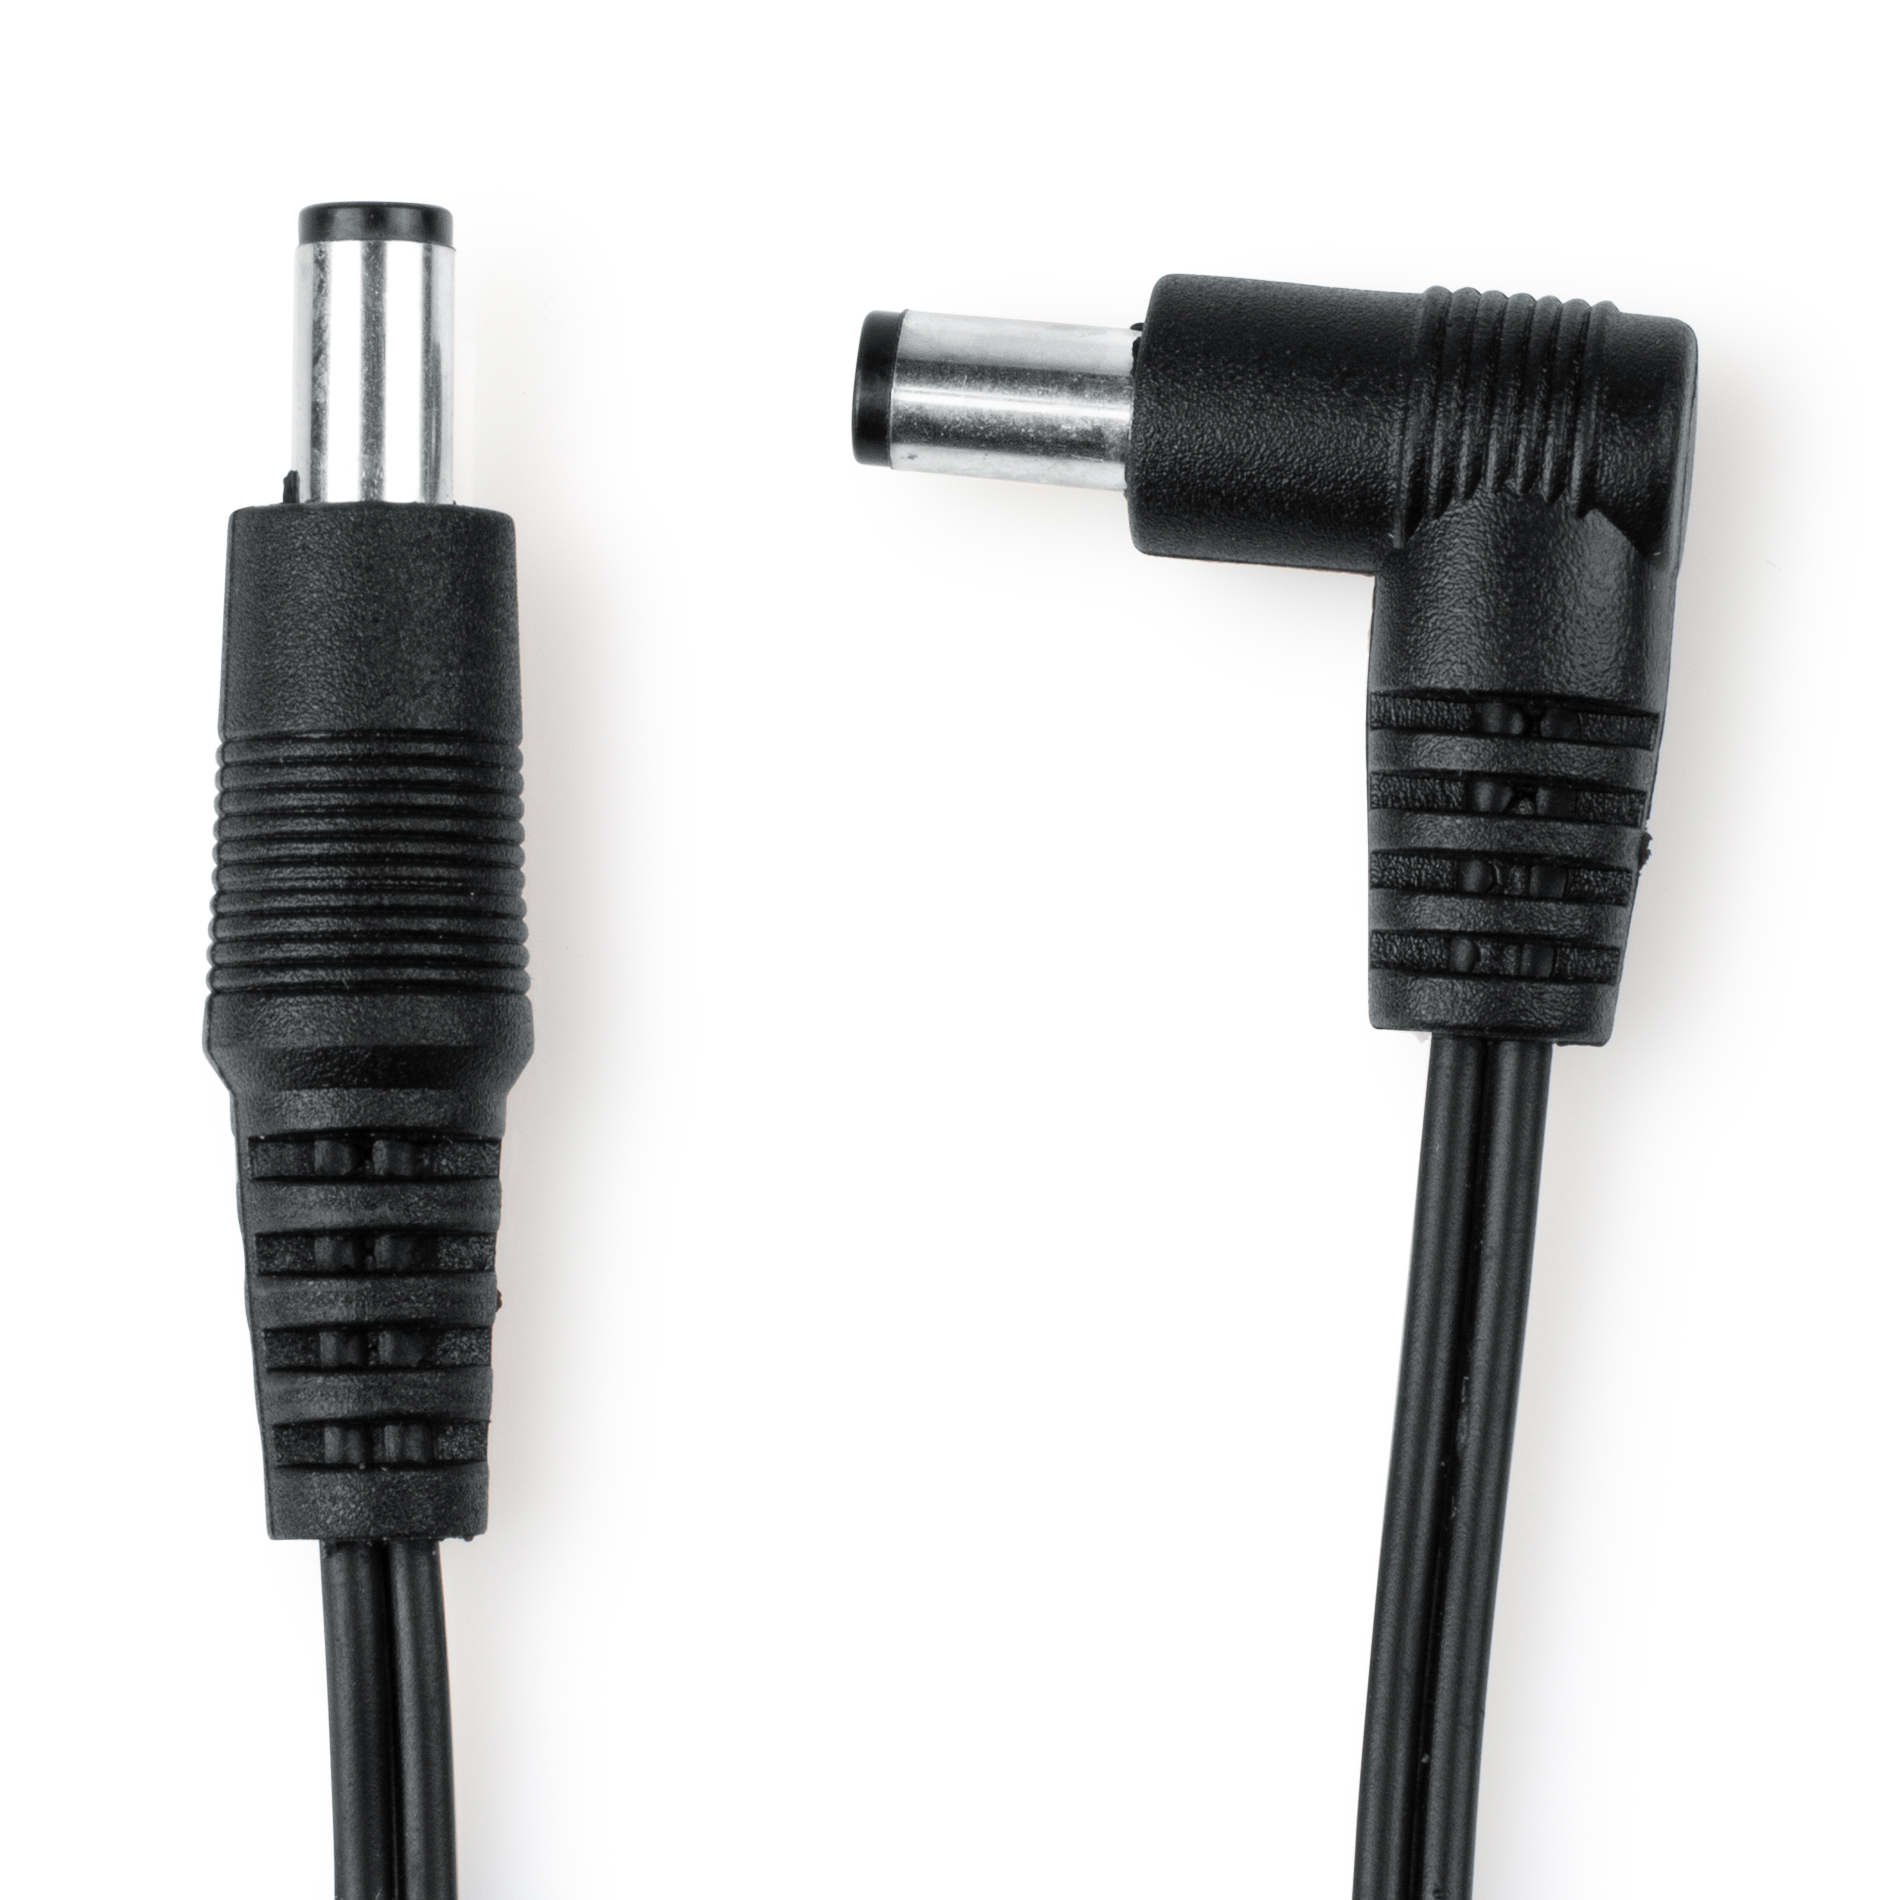 Single DC Power Cable for Pedals – 32″ Long-GTR-PWR-DCP32